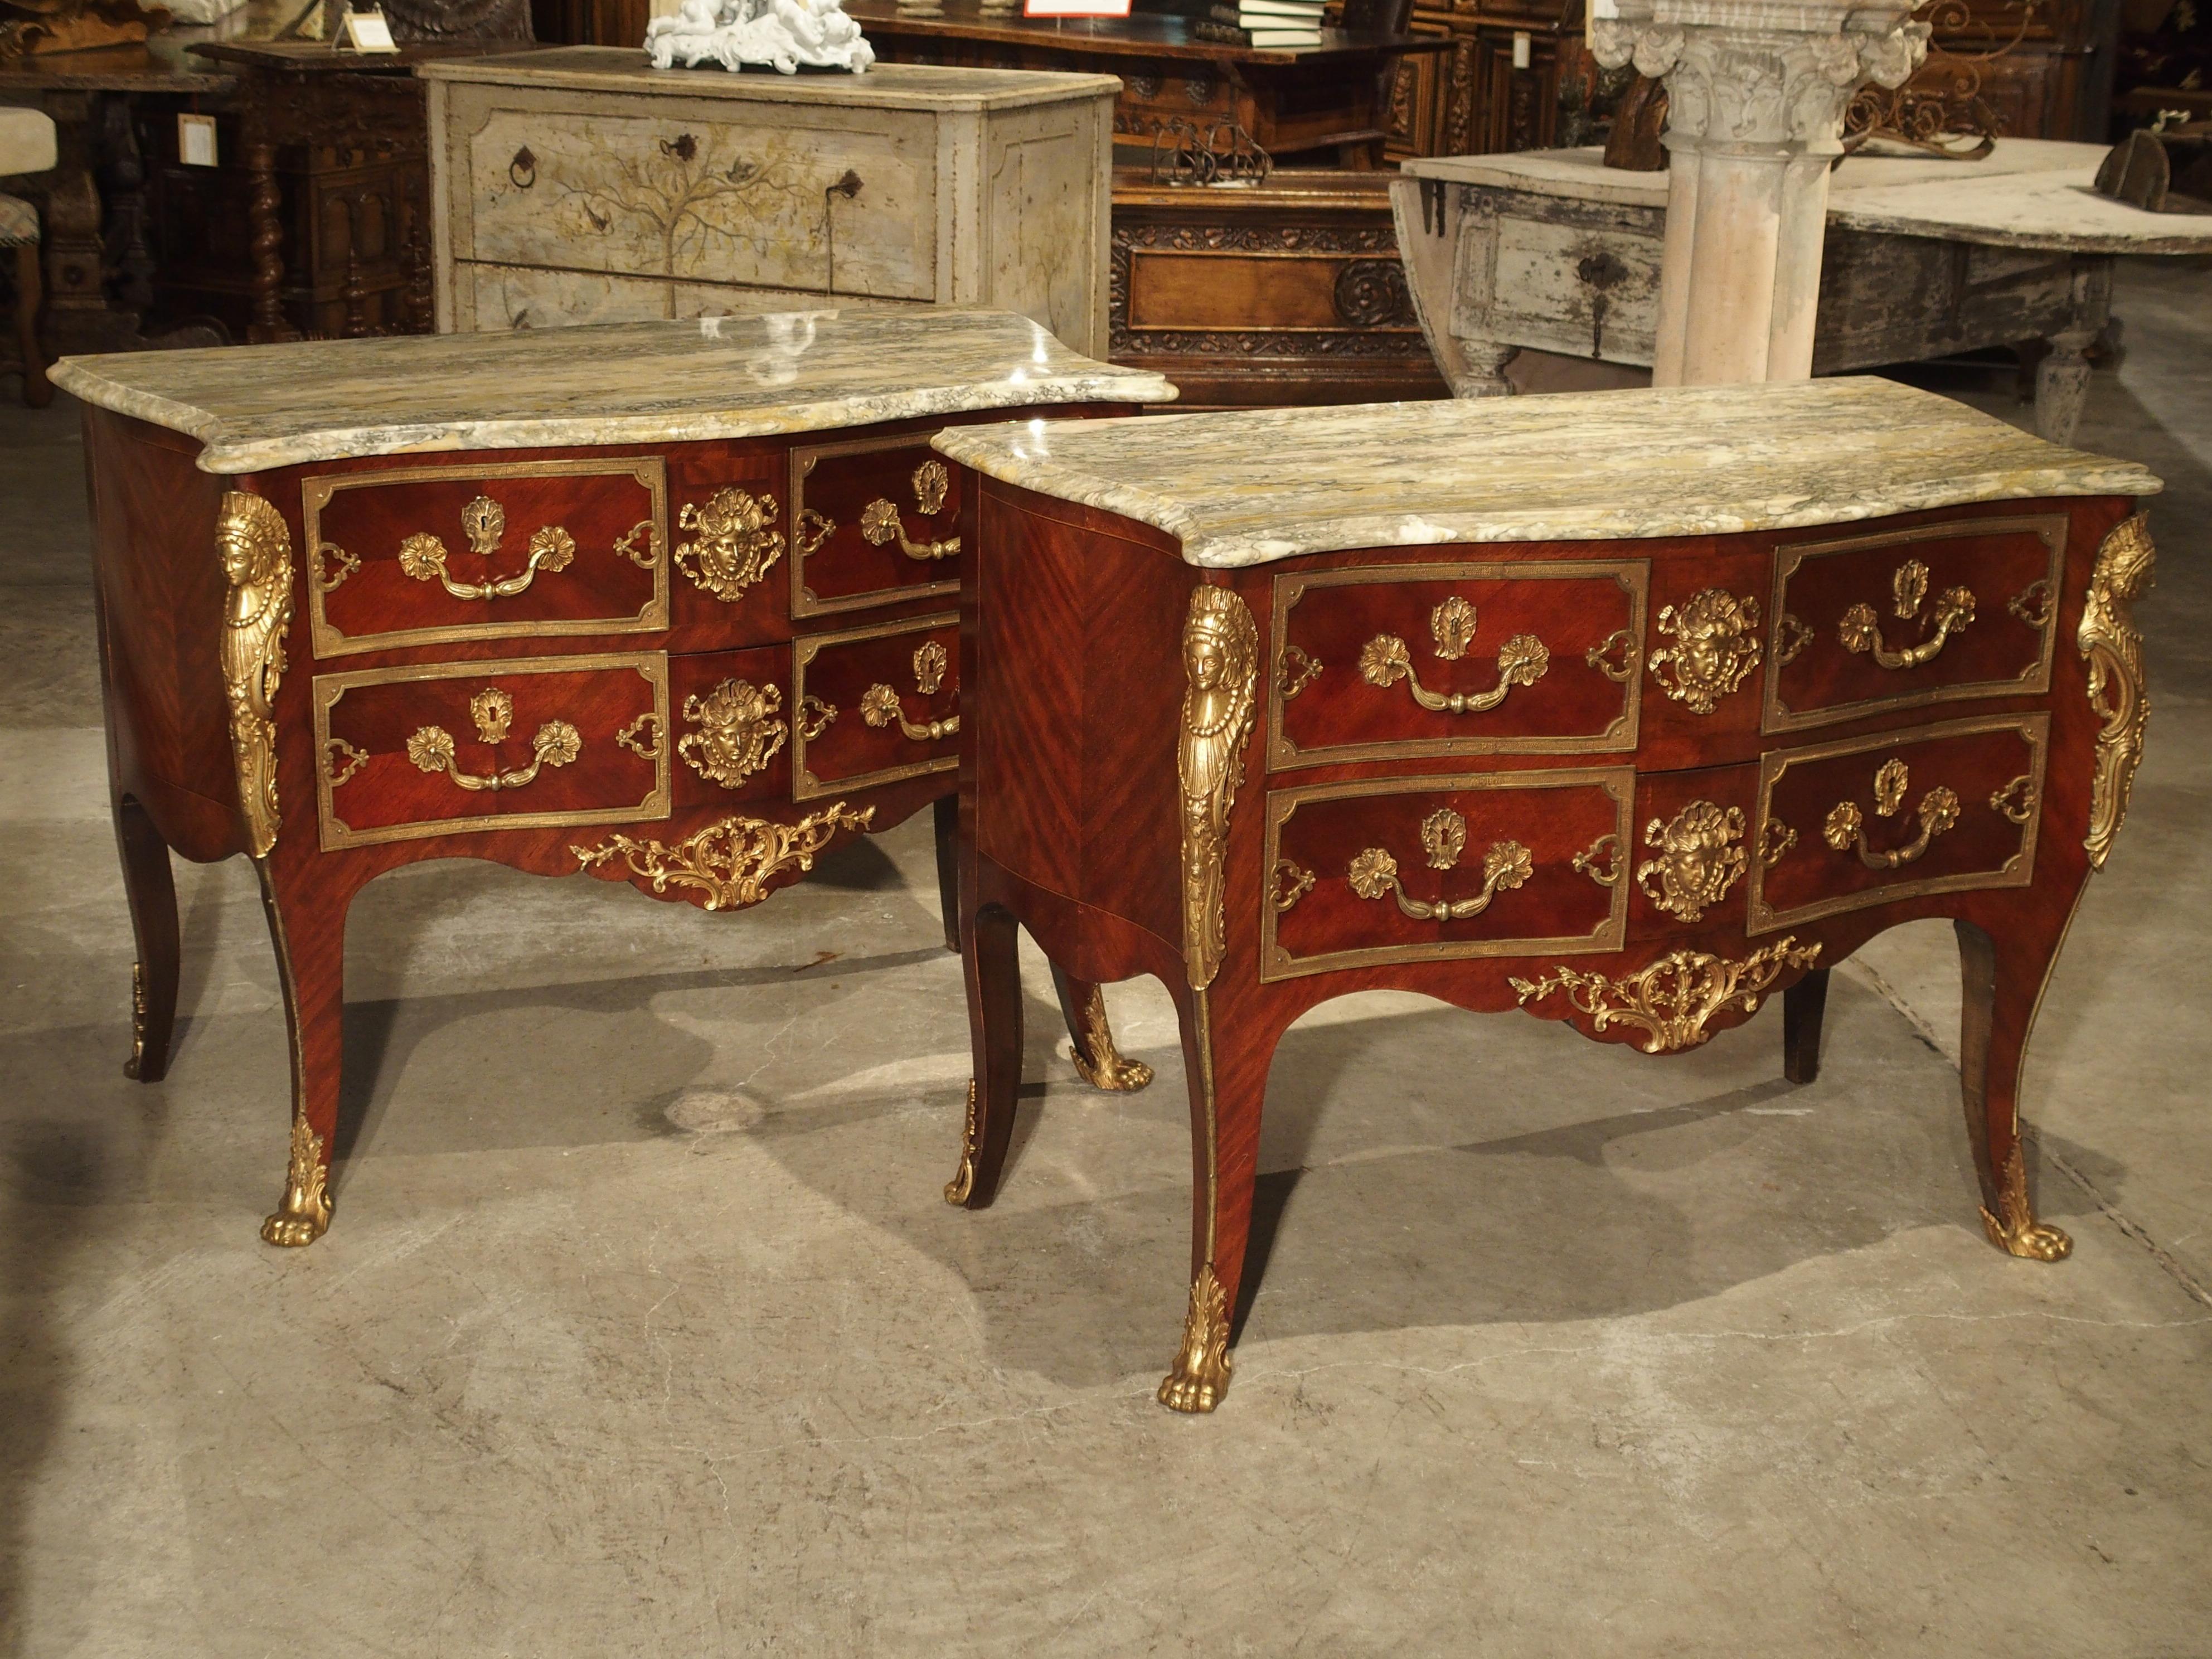 This elegant pair of Louis XV style mahogany commodes are from the workshops of Spain, sometime in the early 20th century. Each commode has variegated, light colored marble tops and beautiful gilt bronze mounts. Pairs of Louis XV style commodes of